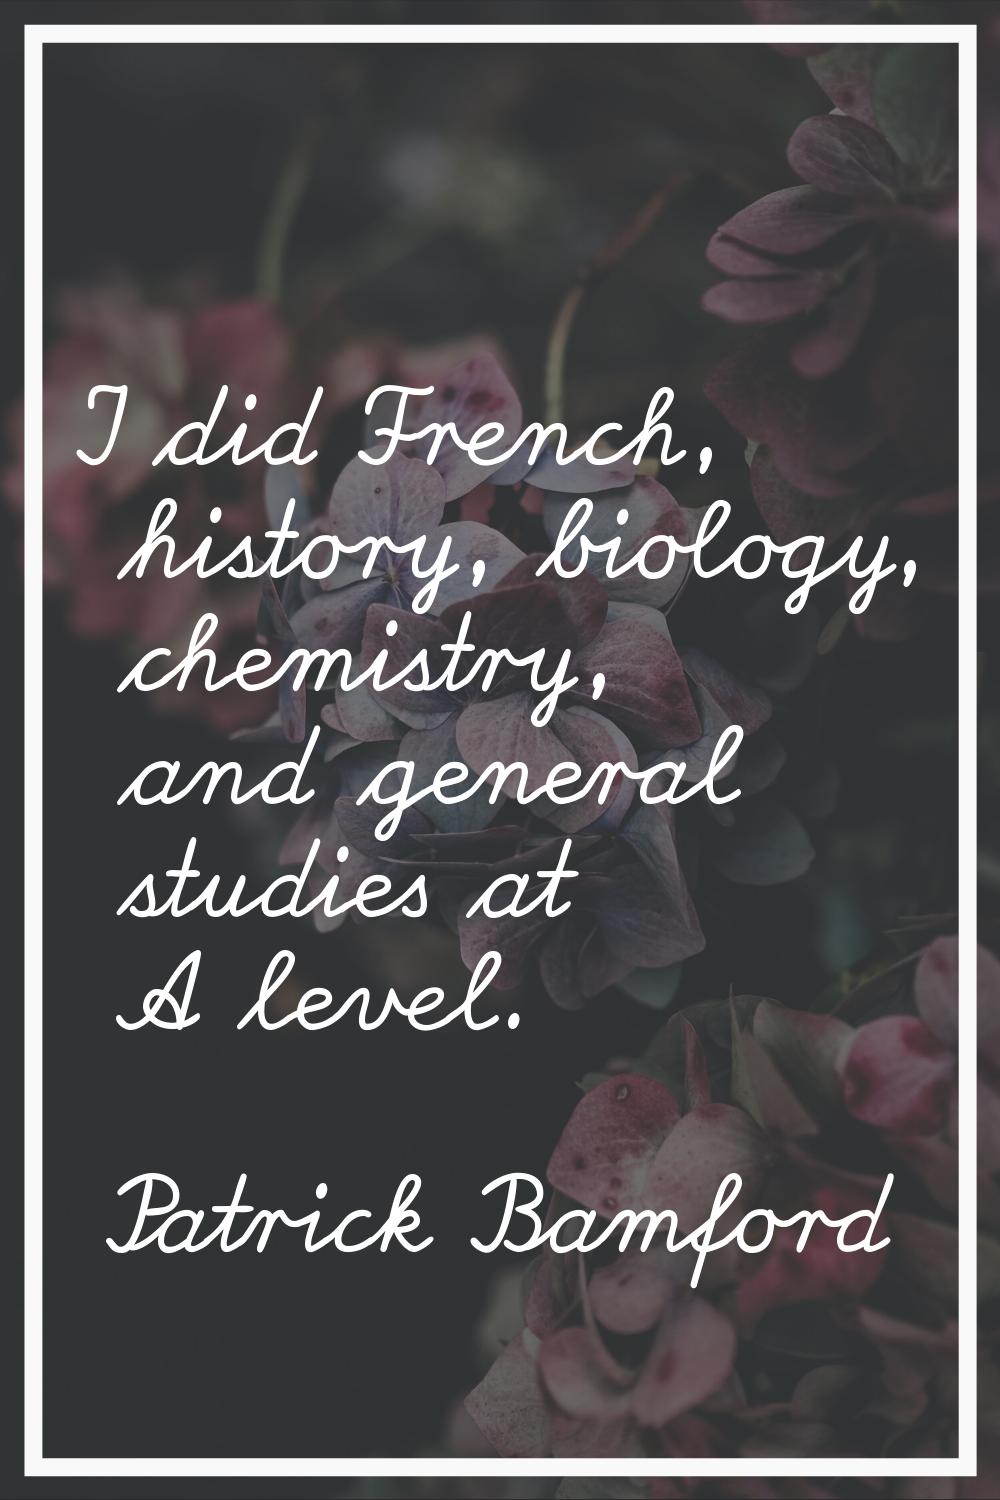 I did French, history, biology, chemistry, and general studies at A level.